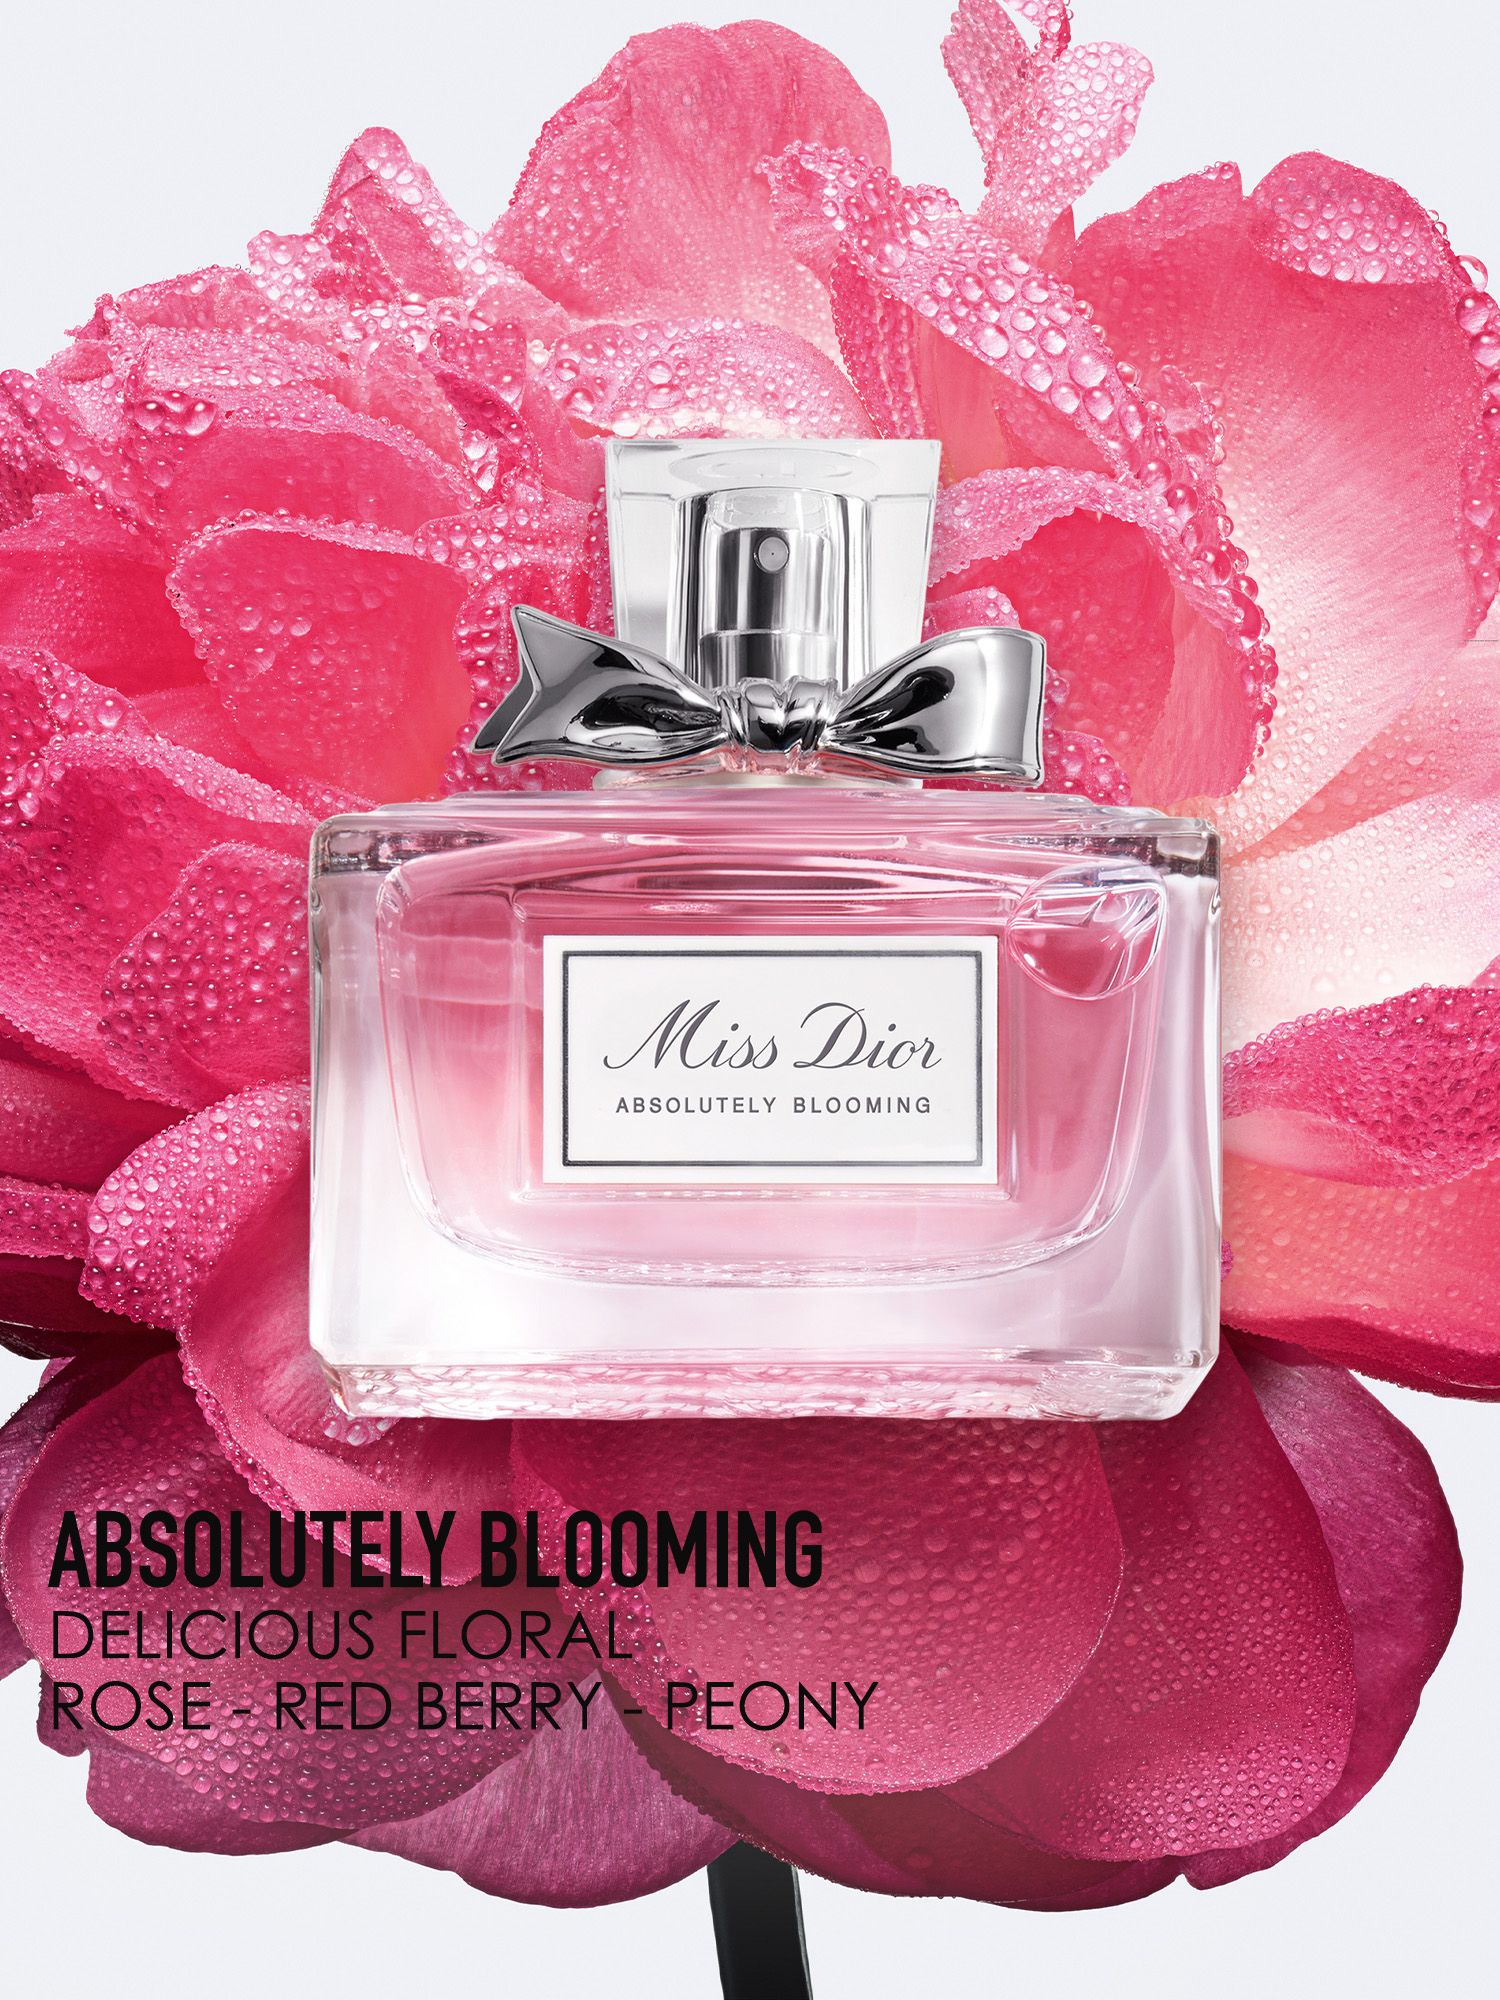 miss dior absolutely blooming edp 100ml